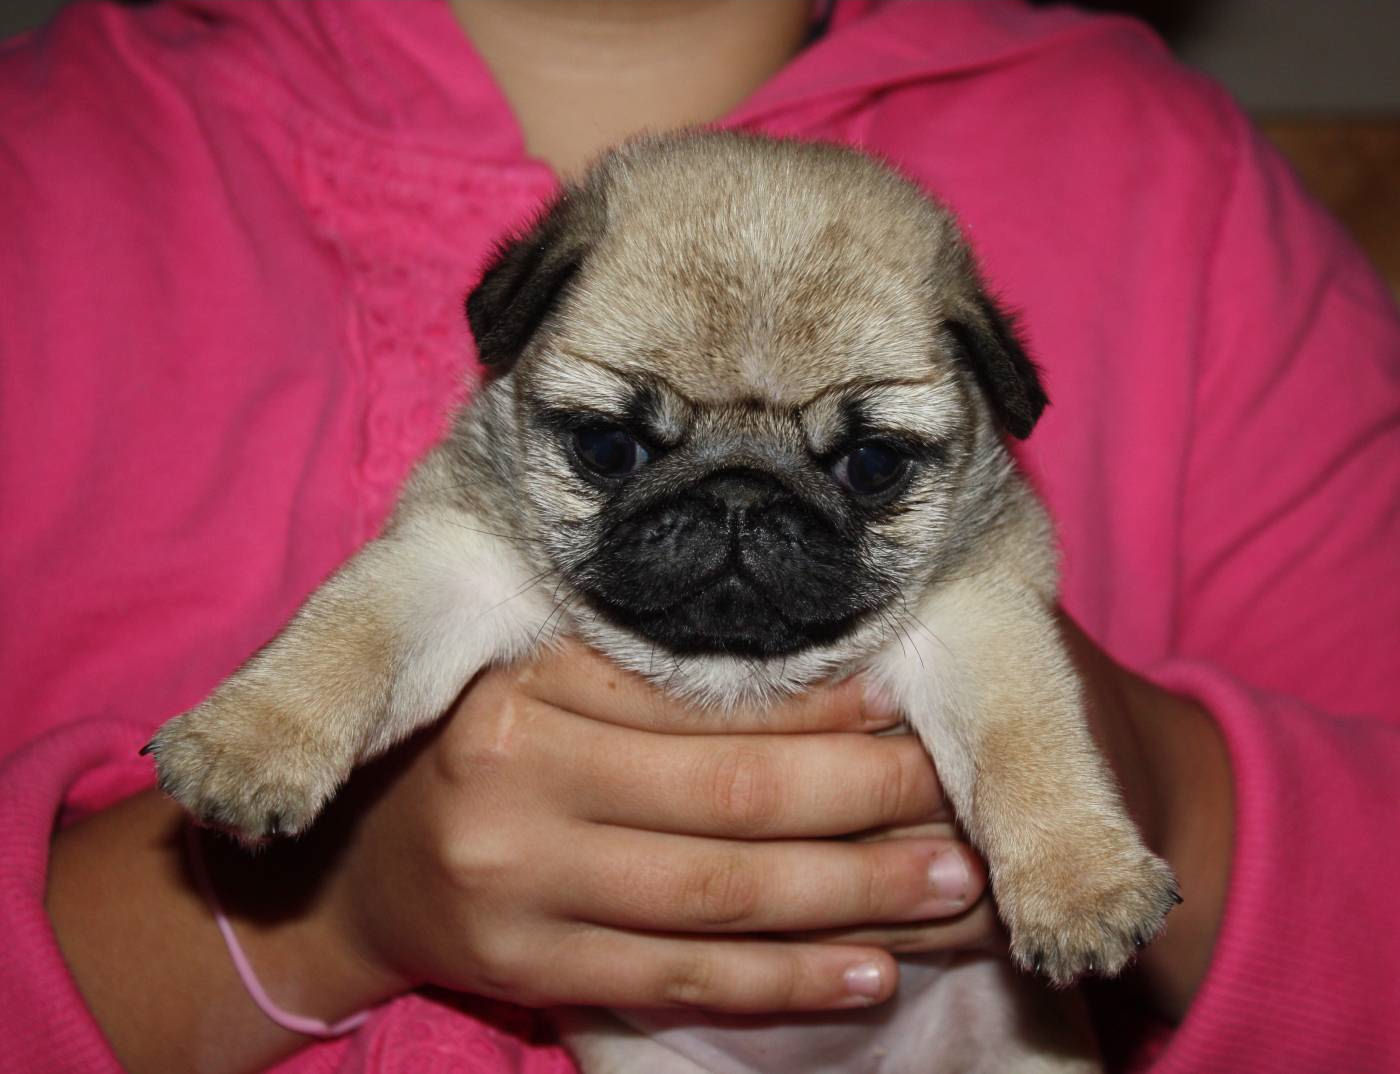 Journey with Pugs: The cutest Pug puppy in the world